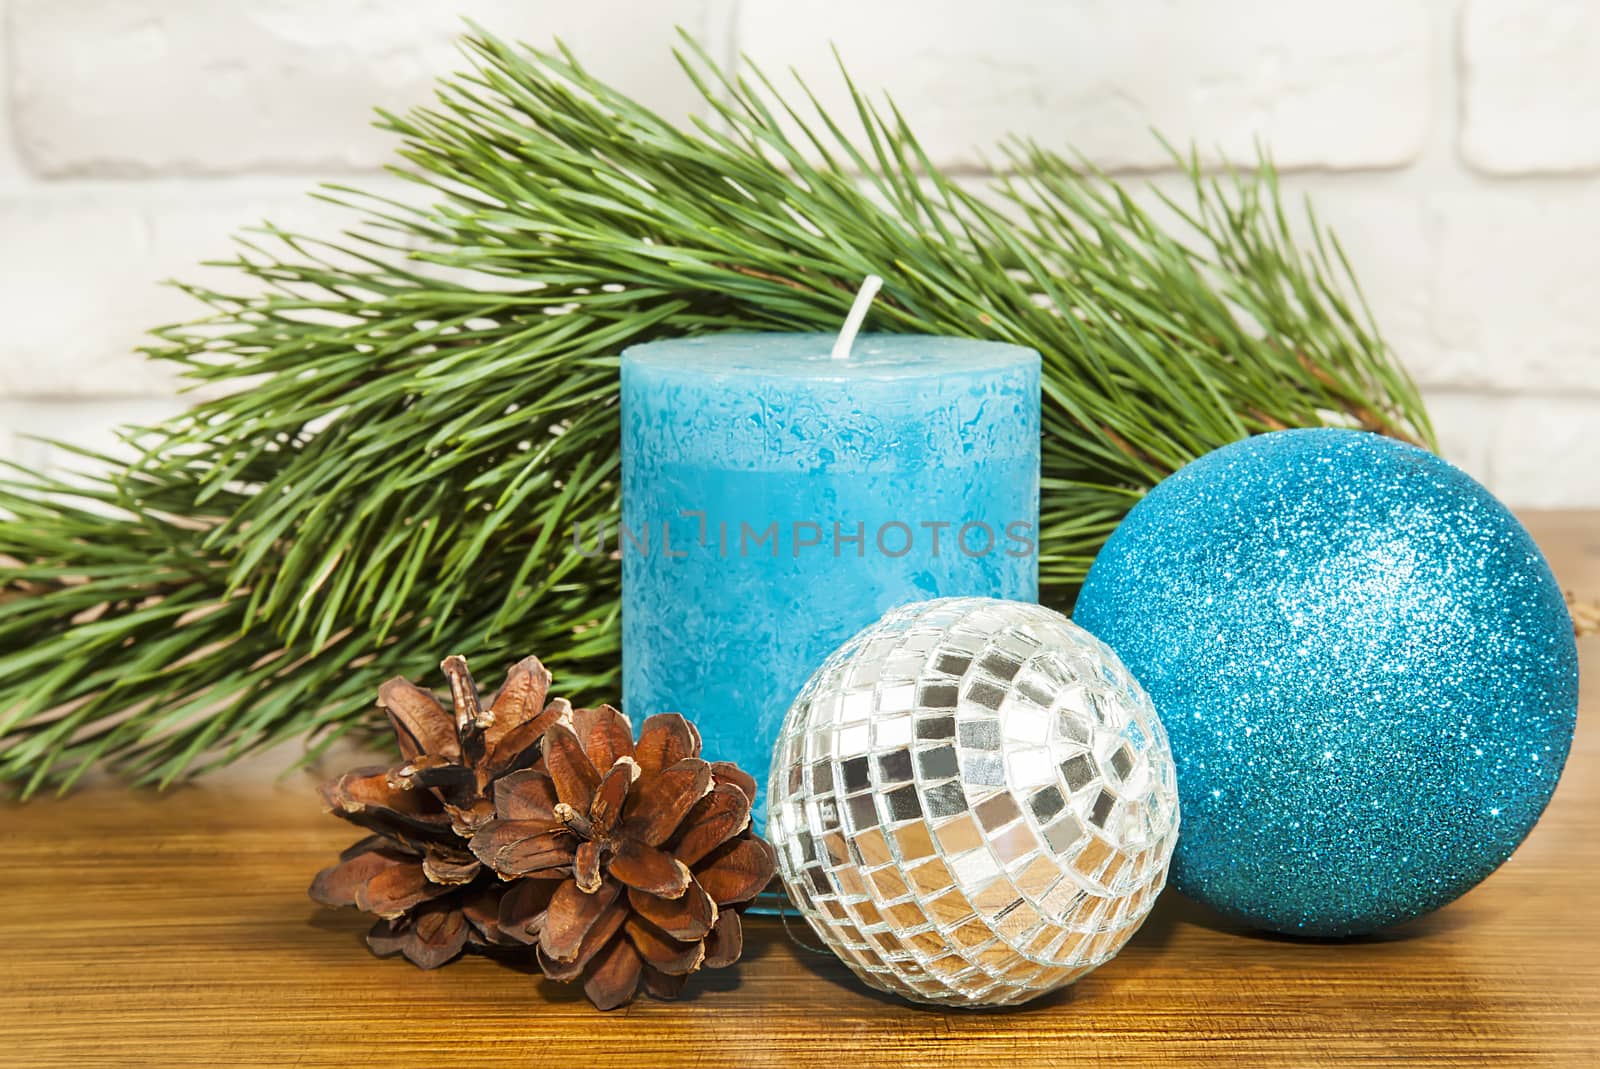 New Year 2017 composition with bright blue glitter ball and candle on wooden back ground